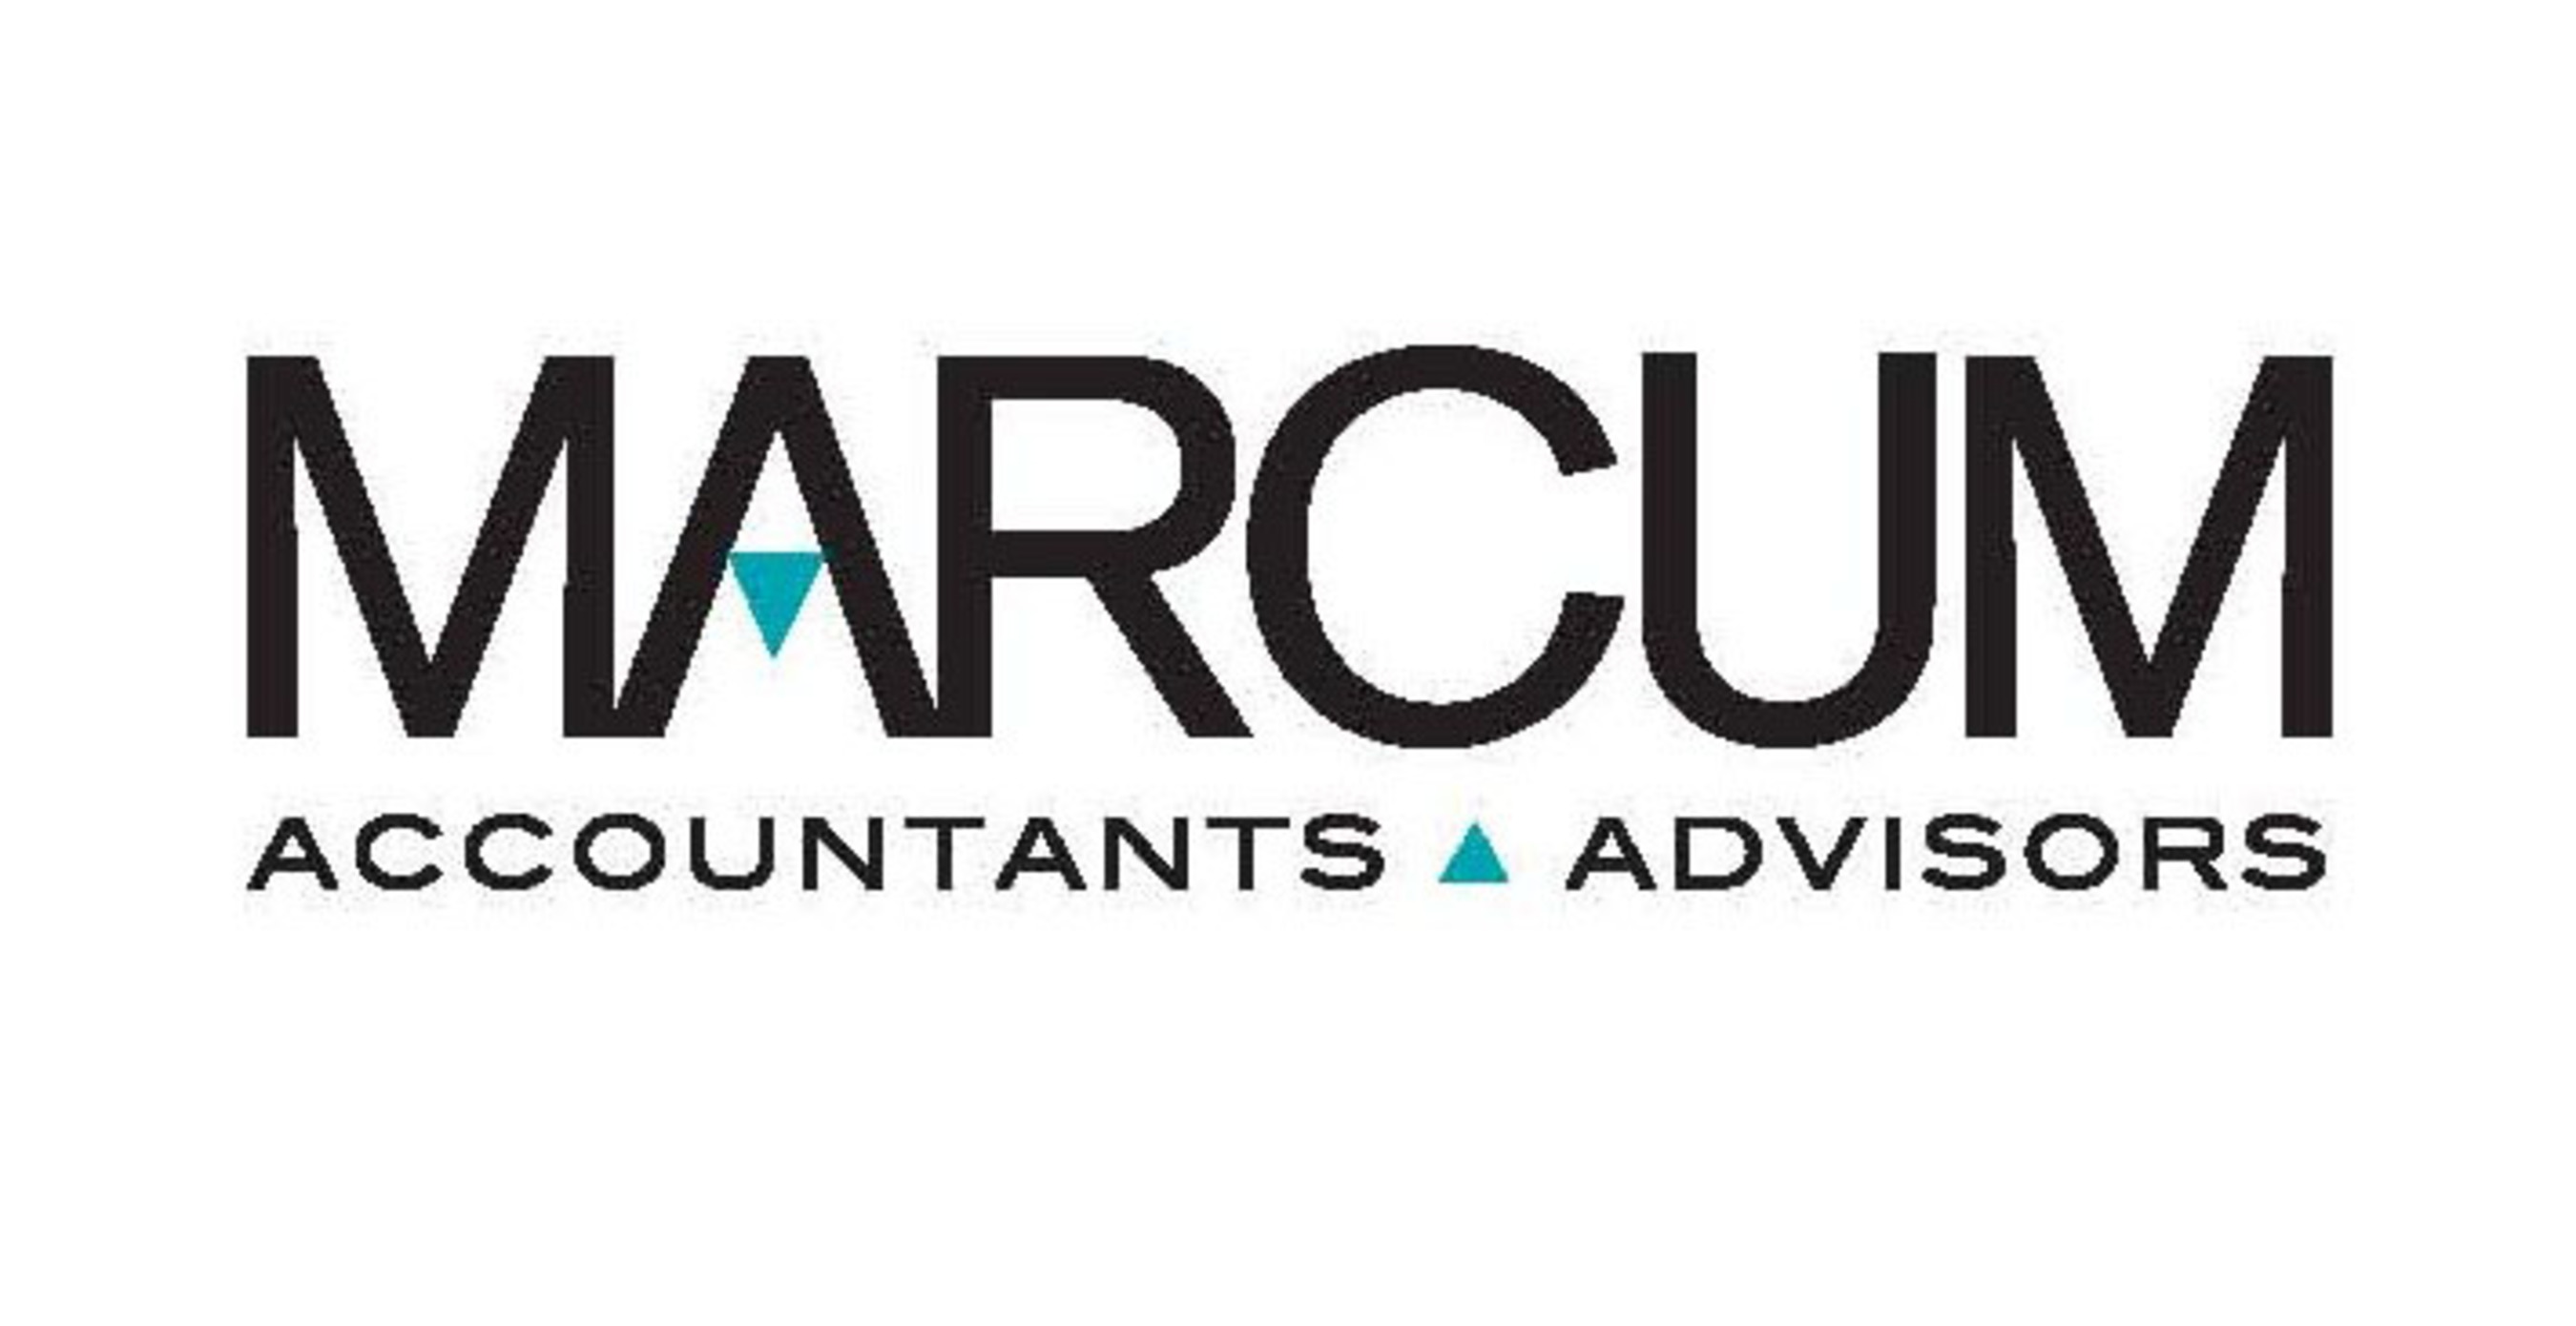 Marcum LLP is a top national accounting and advisory services firm. Marcum offers the resources of 1,300 professionals, including over 160 partners, in 23 offices throughout the U.S., Grand Cayman and China.